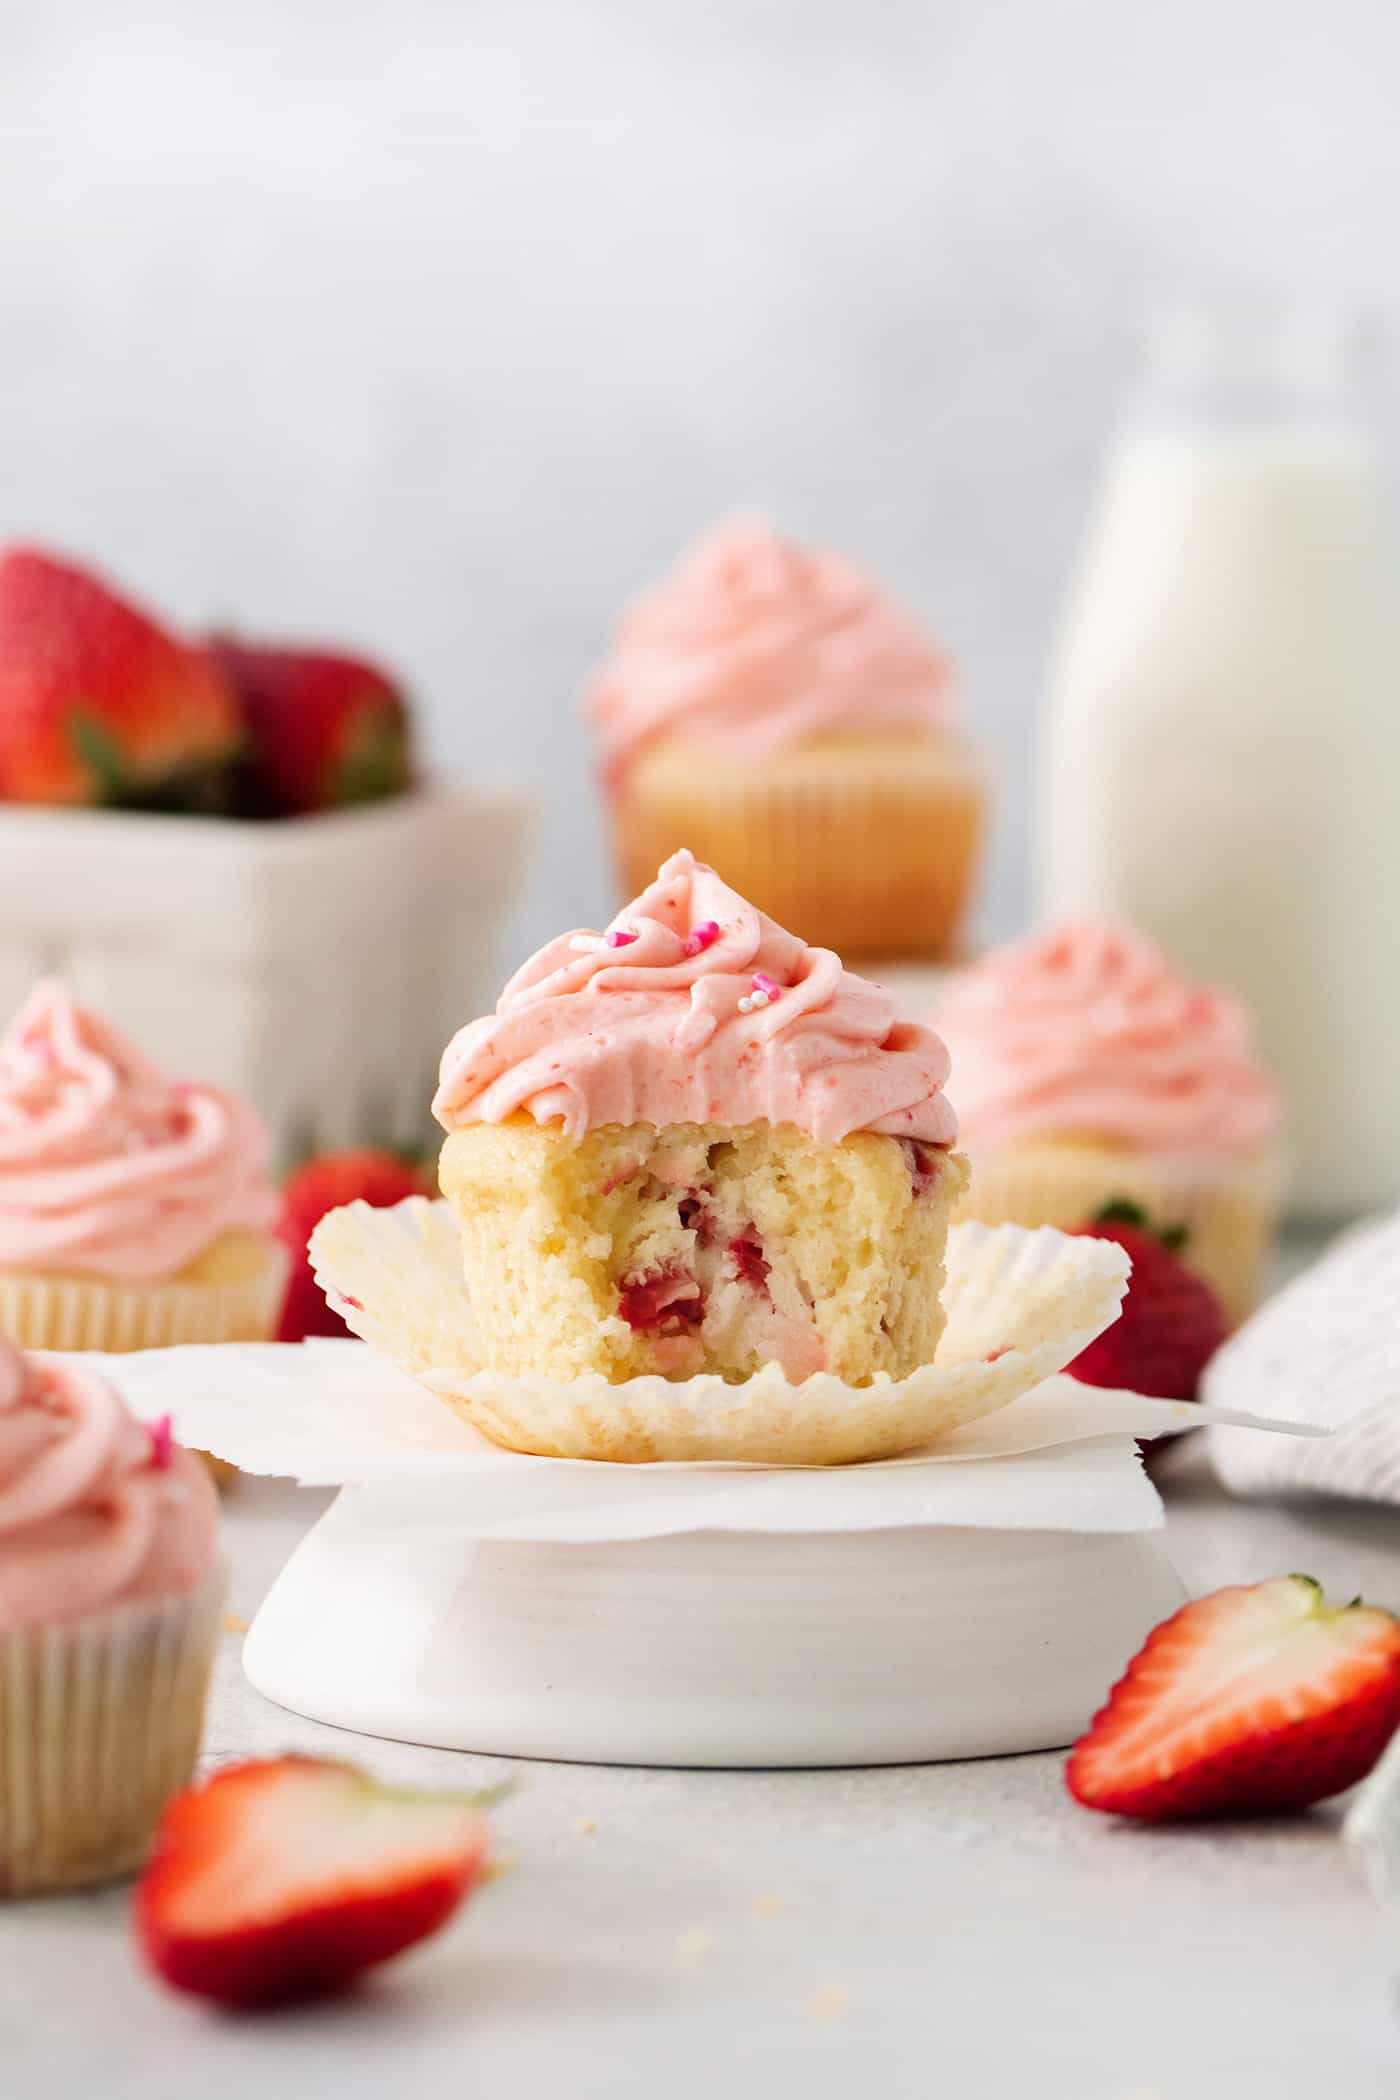 A batch of frosted strawberry cupcakes is shown with one cupcake cut open to show the interior.